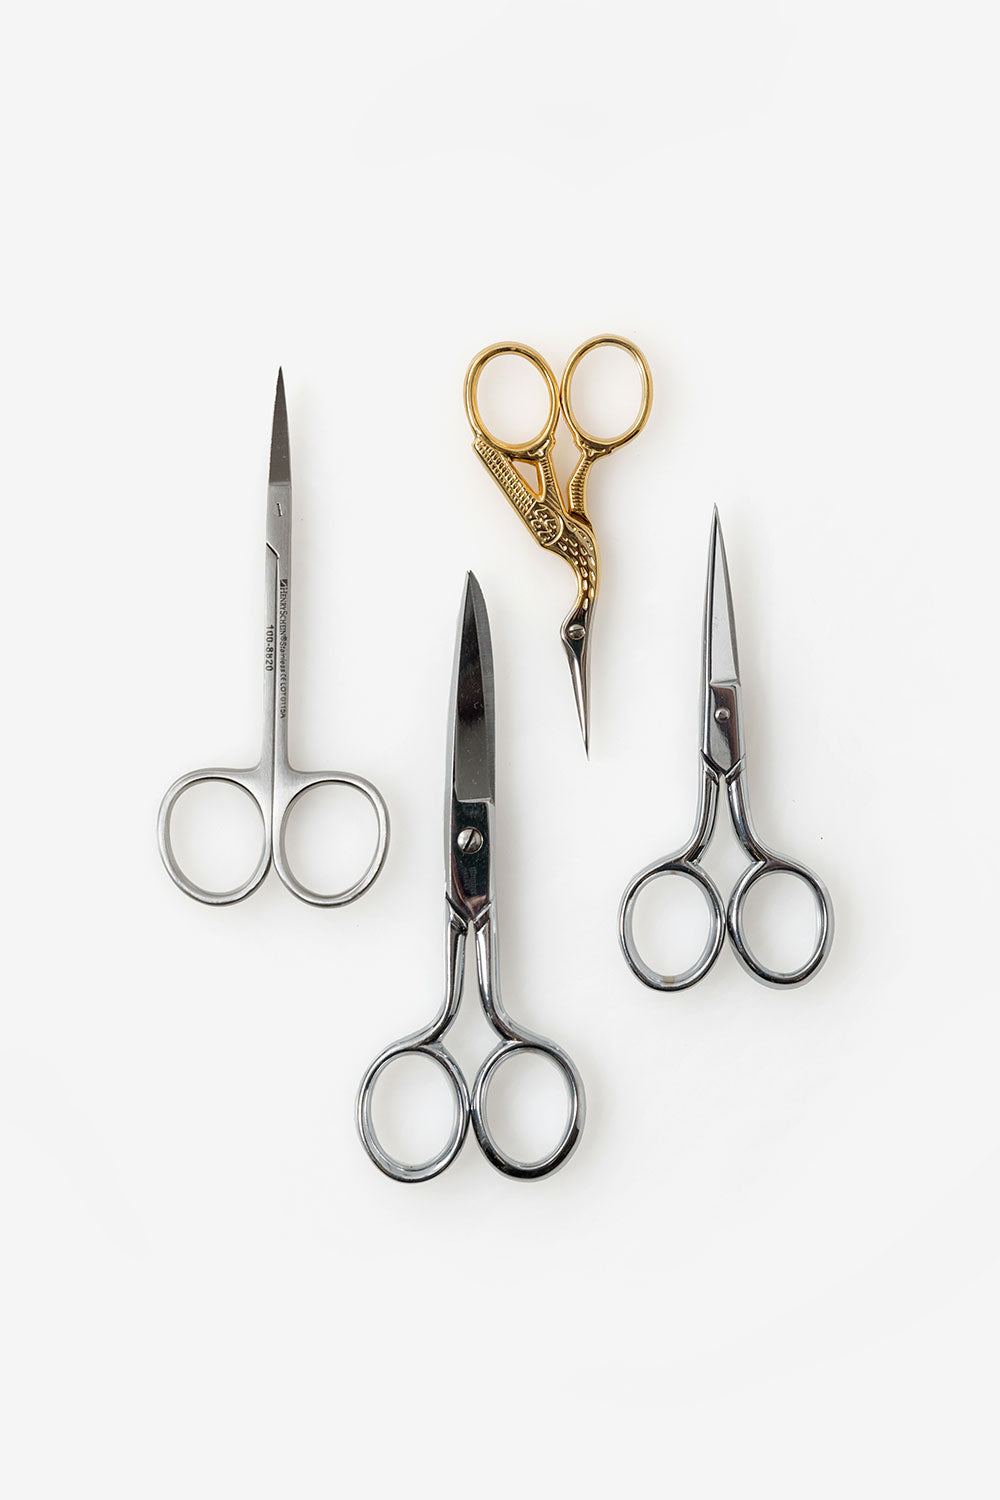 An assortment of small scissors from The School of Making.